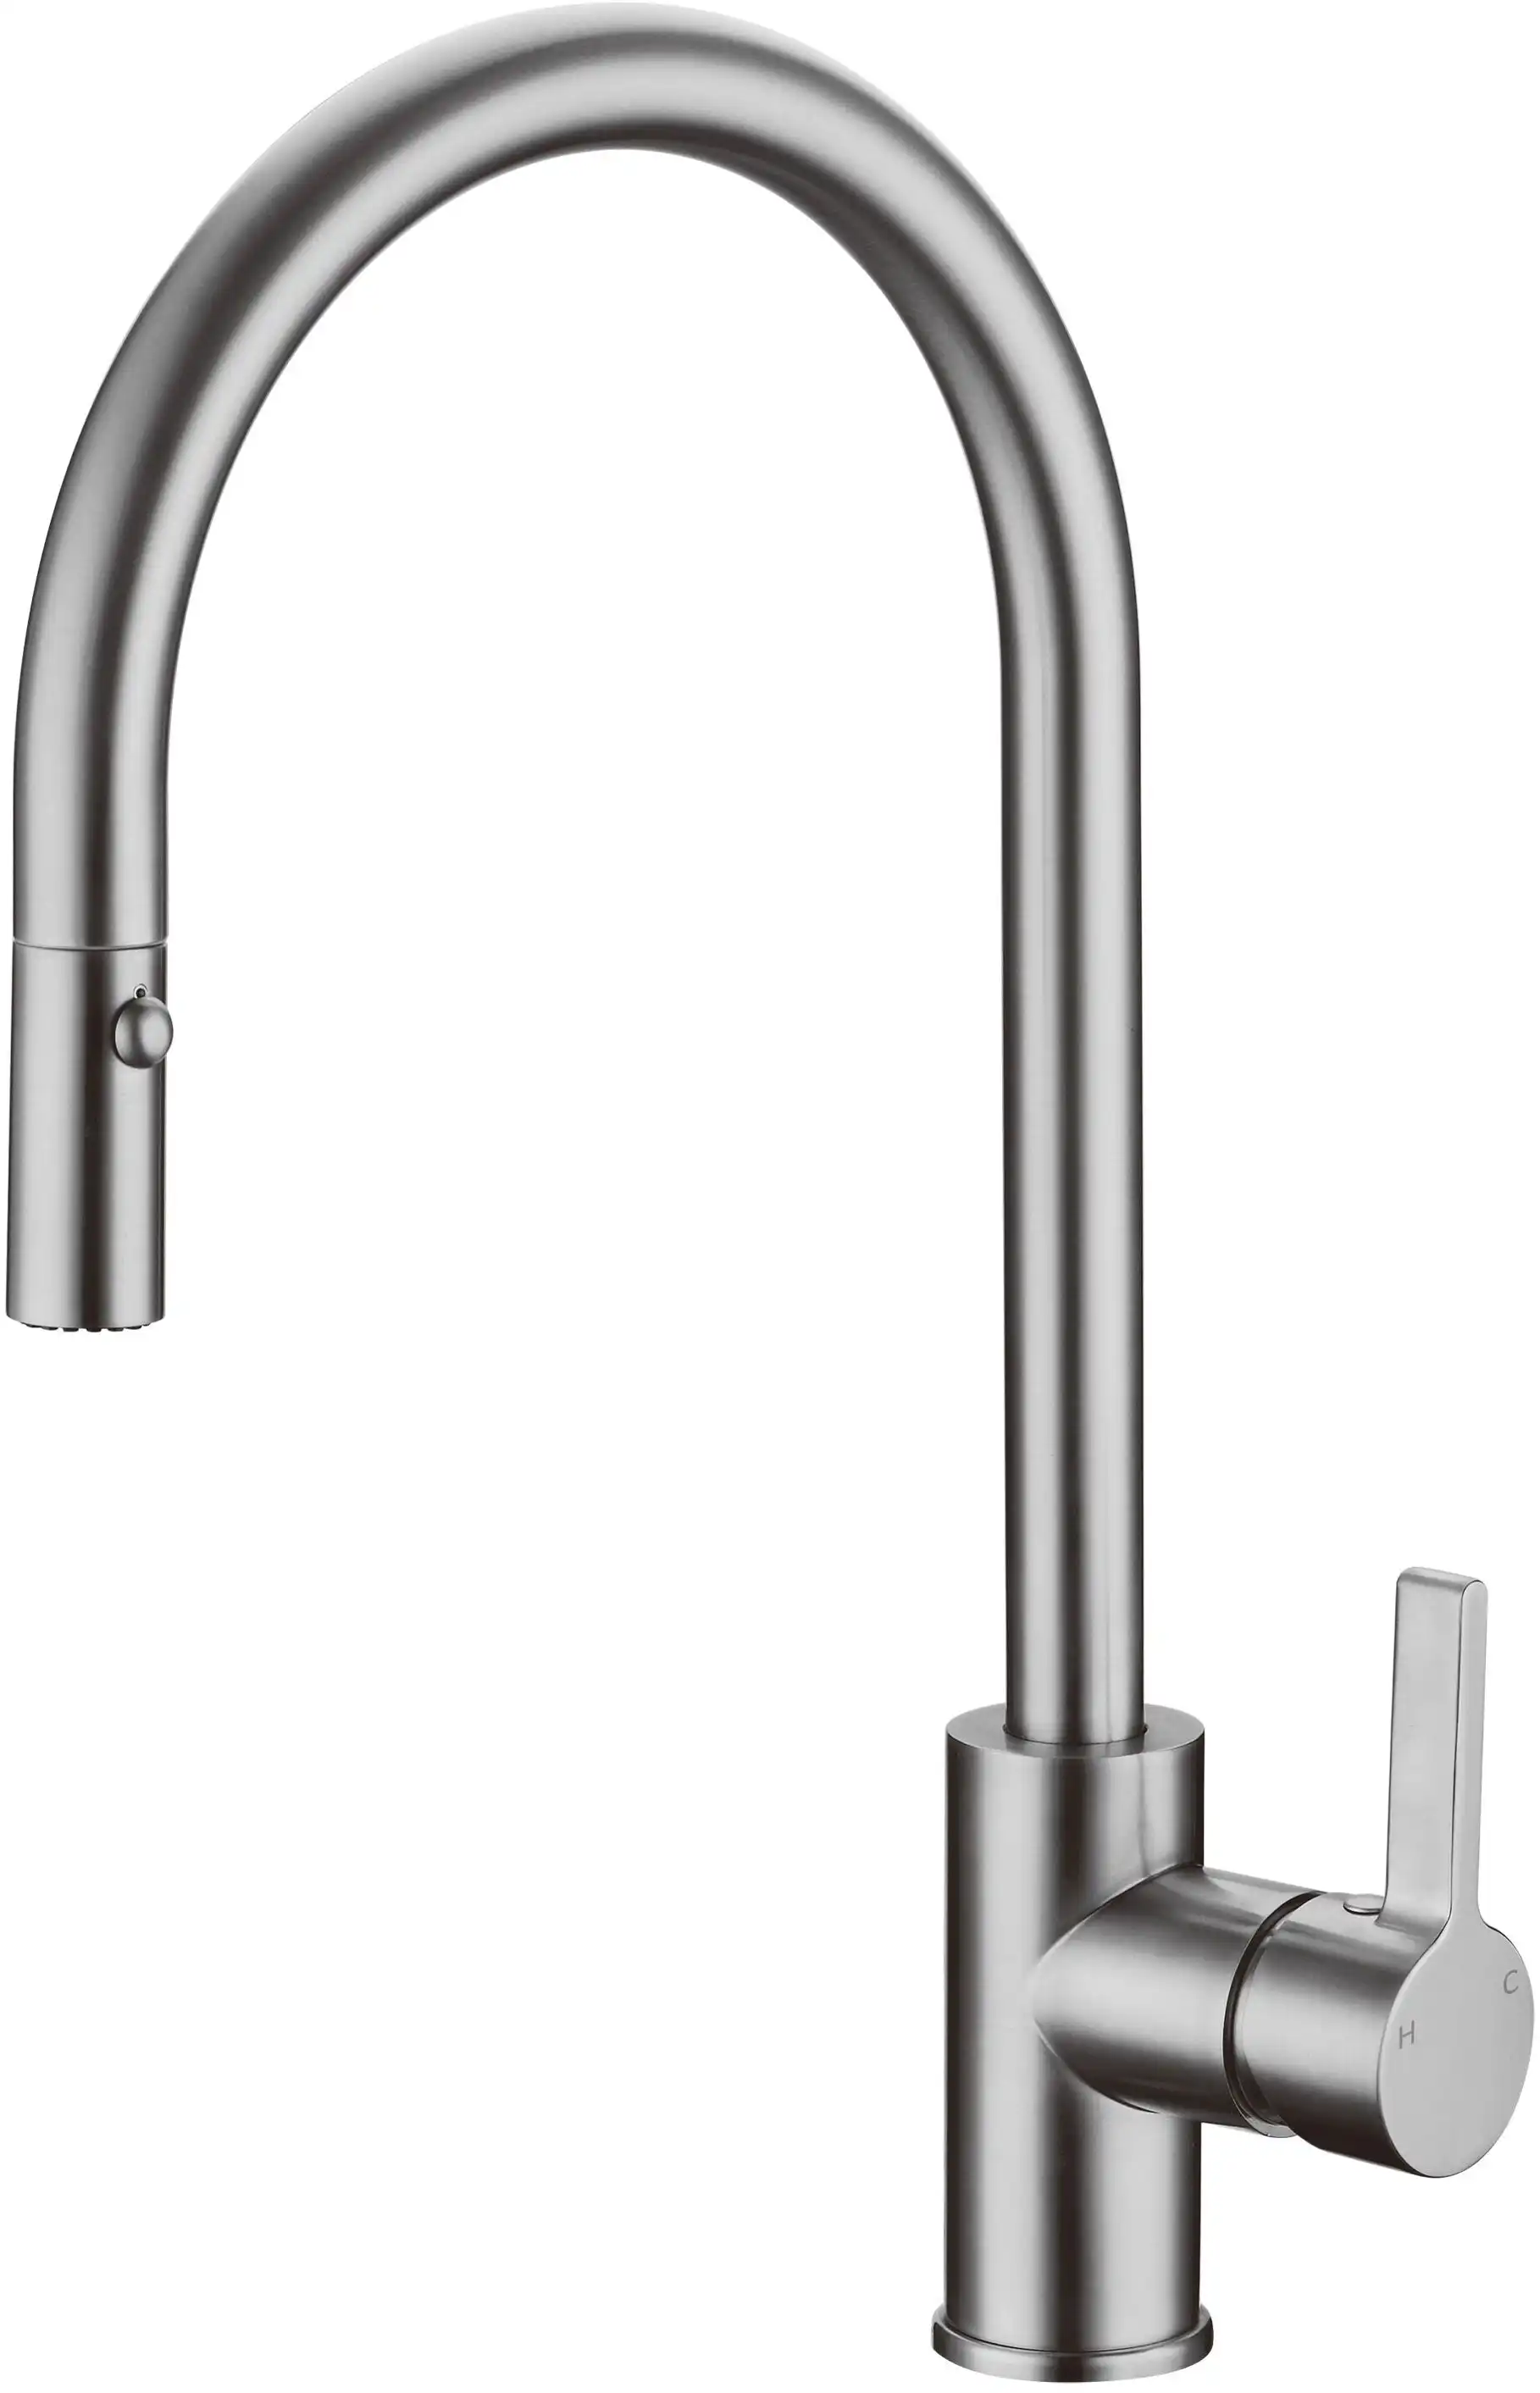 Casa Pull-out Sink Mixer Tap Brushed Nickel CASA1016SB-BN